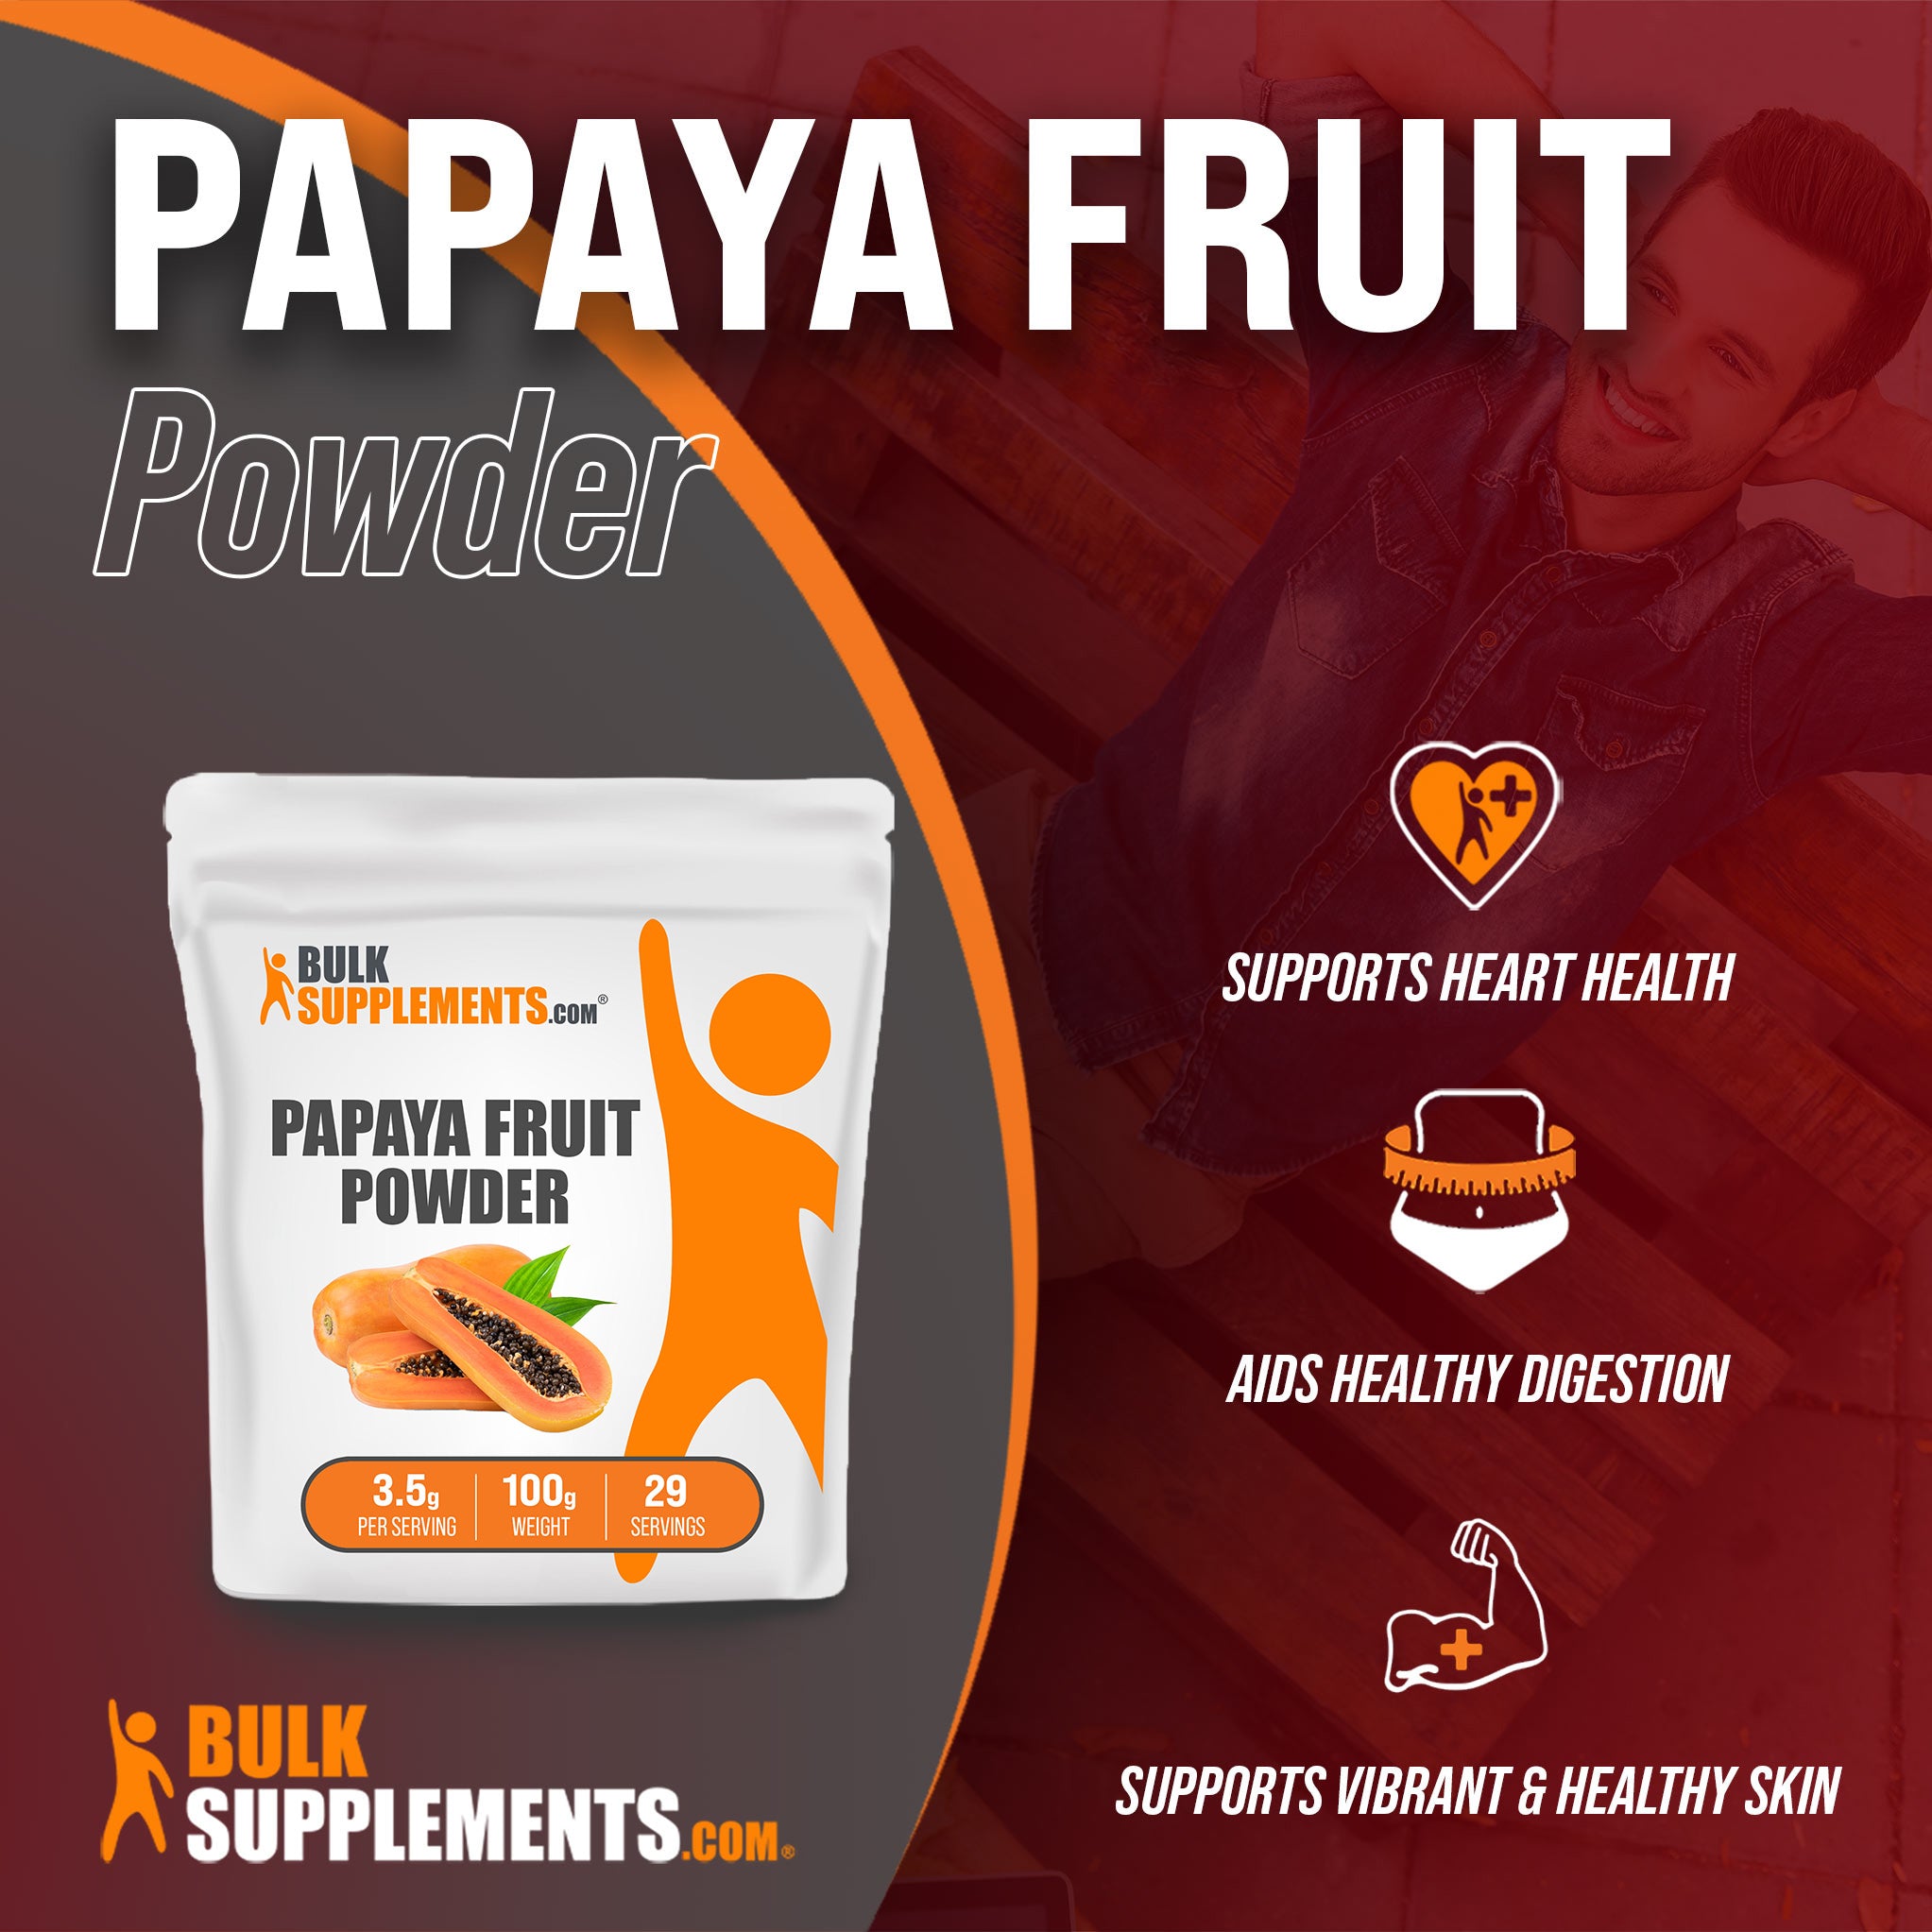 Benefits of Papaya Fruit Powder: supports heart health, aids healthy digestion, supports vibrant and healthy skin